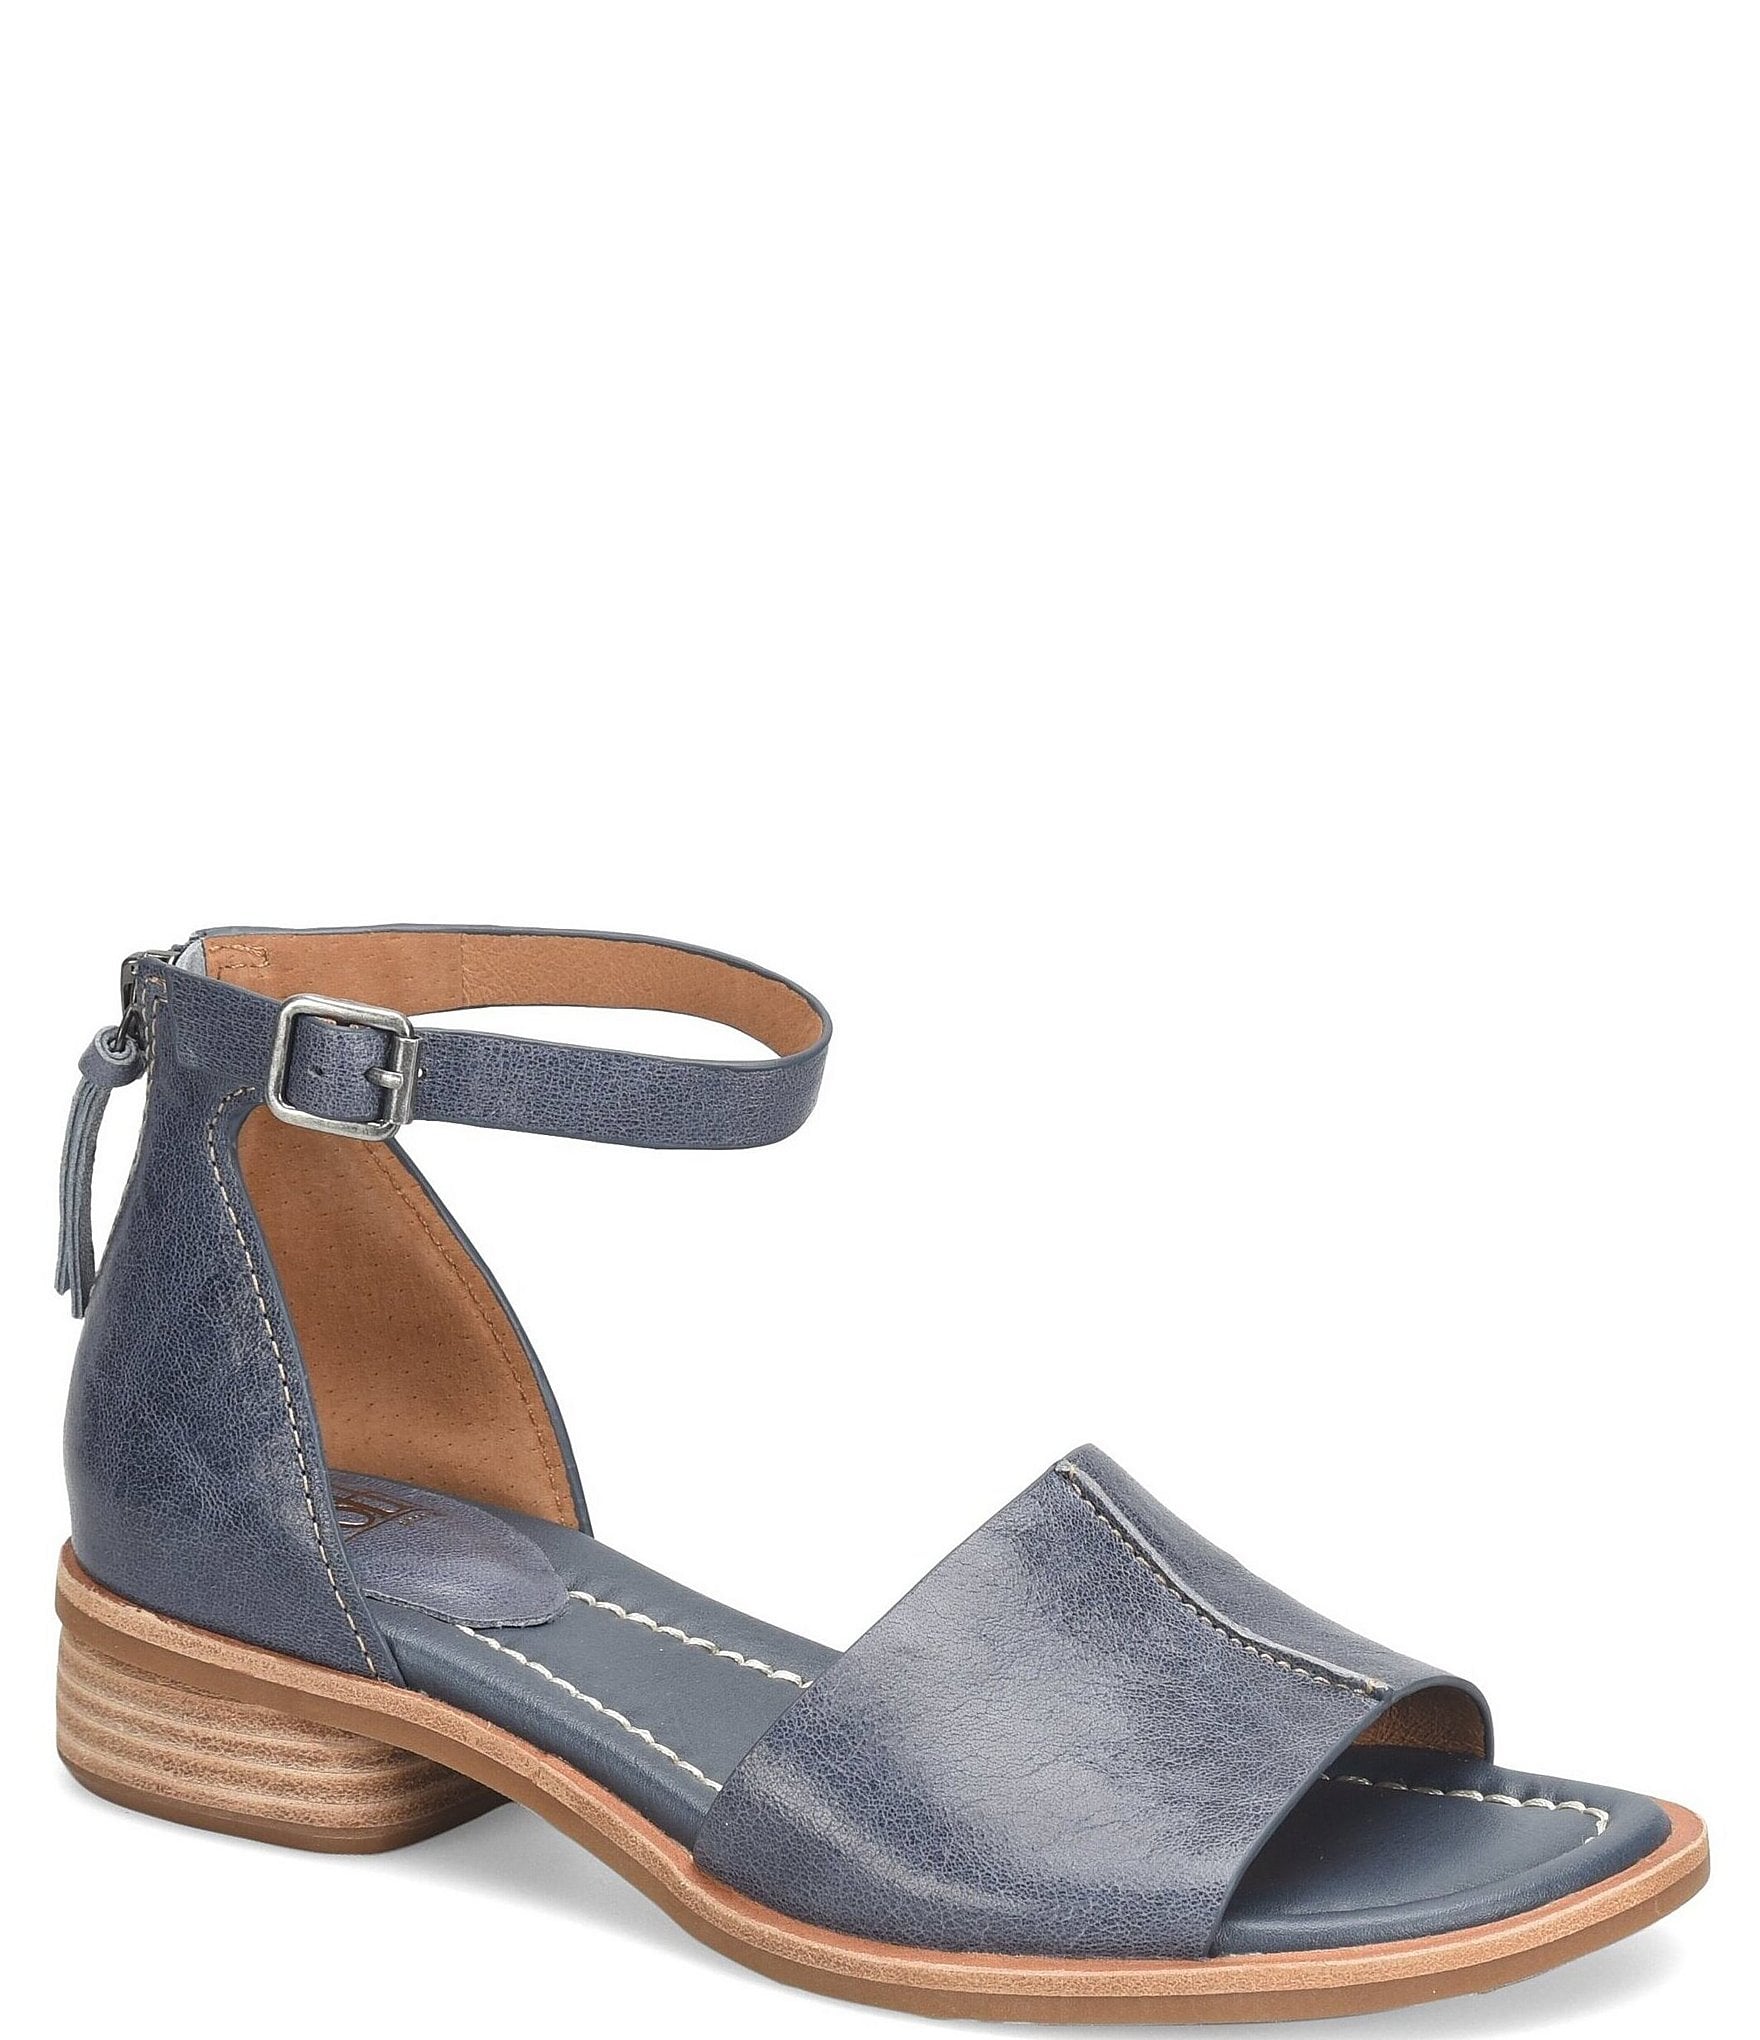 Sofft Faxyn Leather Ankle Strap Sandals Dillards 